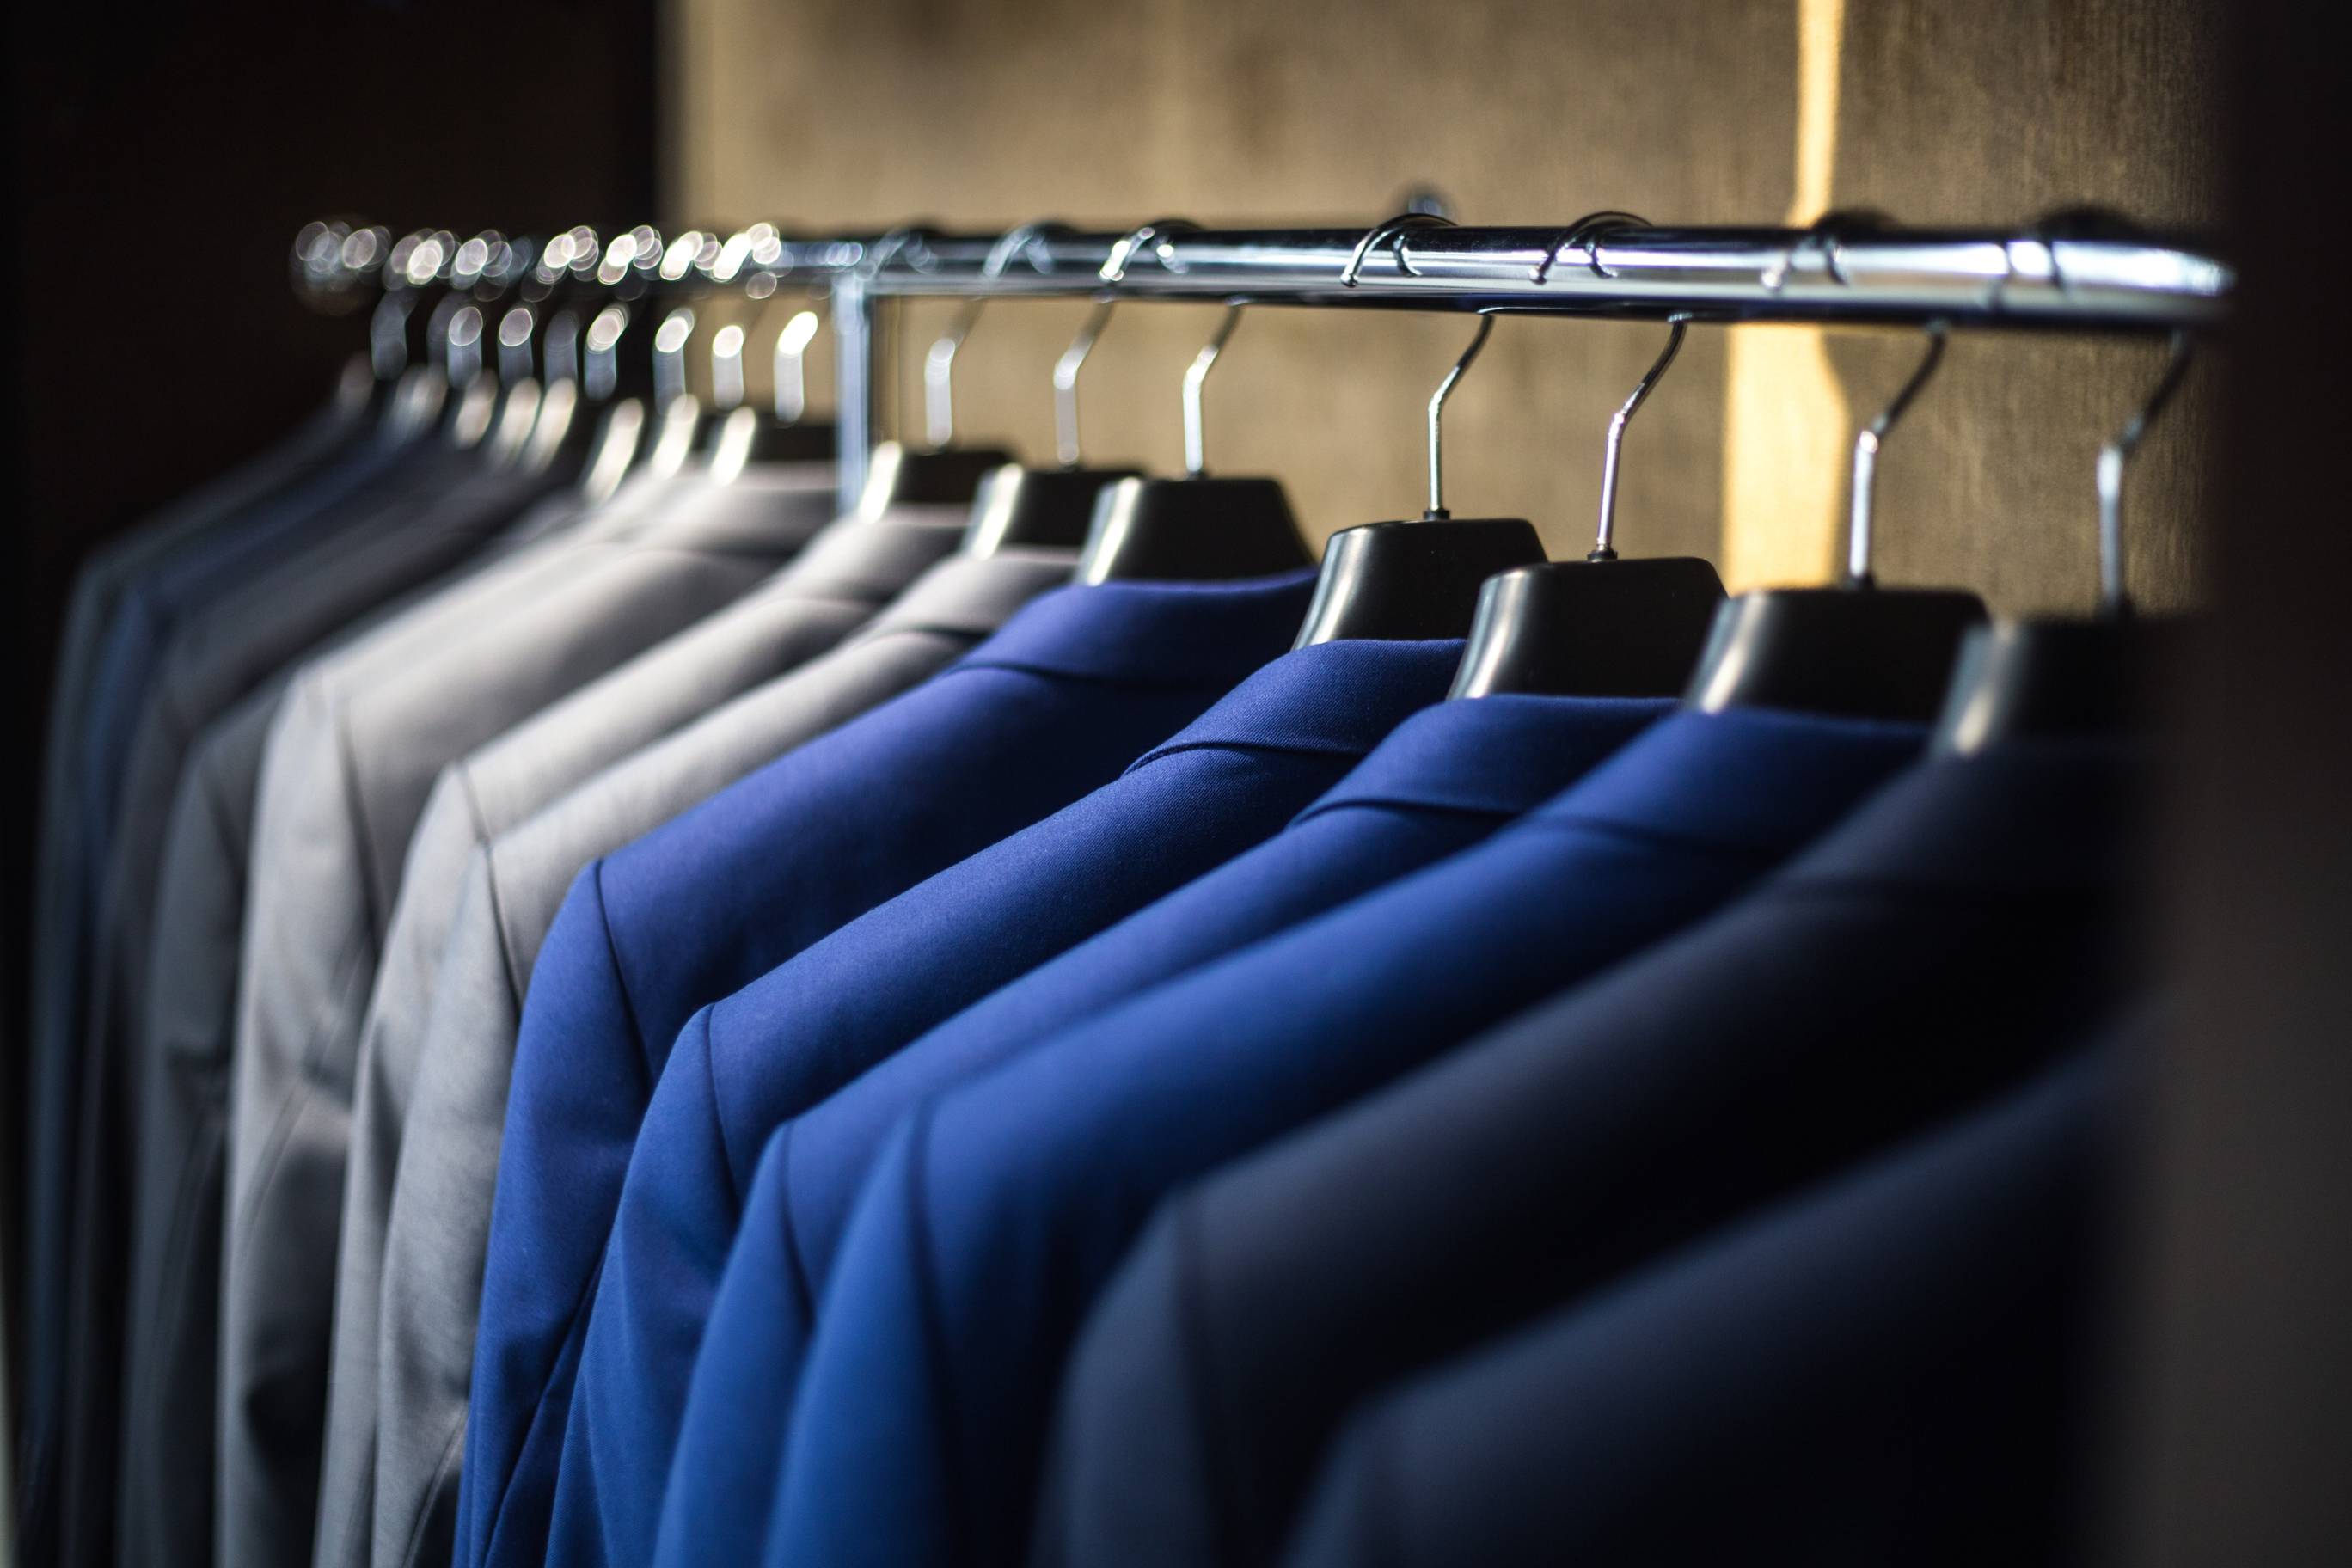 gray, blue and black suit jackets hanging from clothes hangers on a silver clothes rack